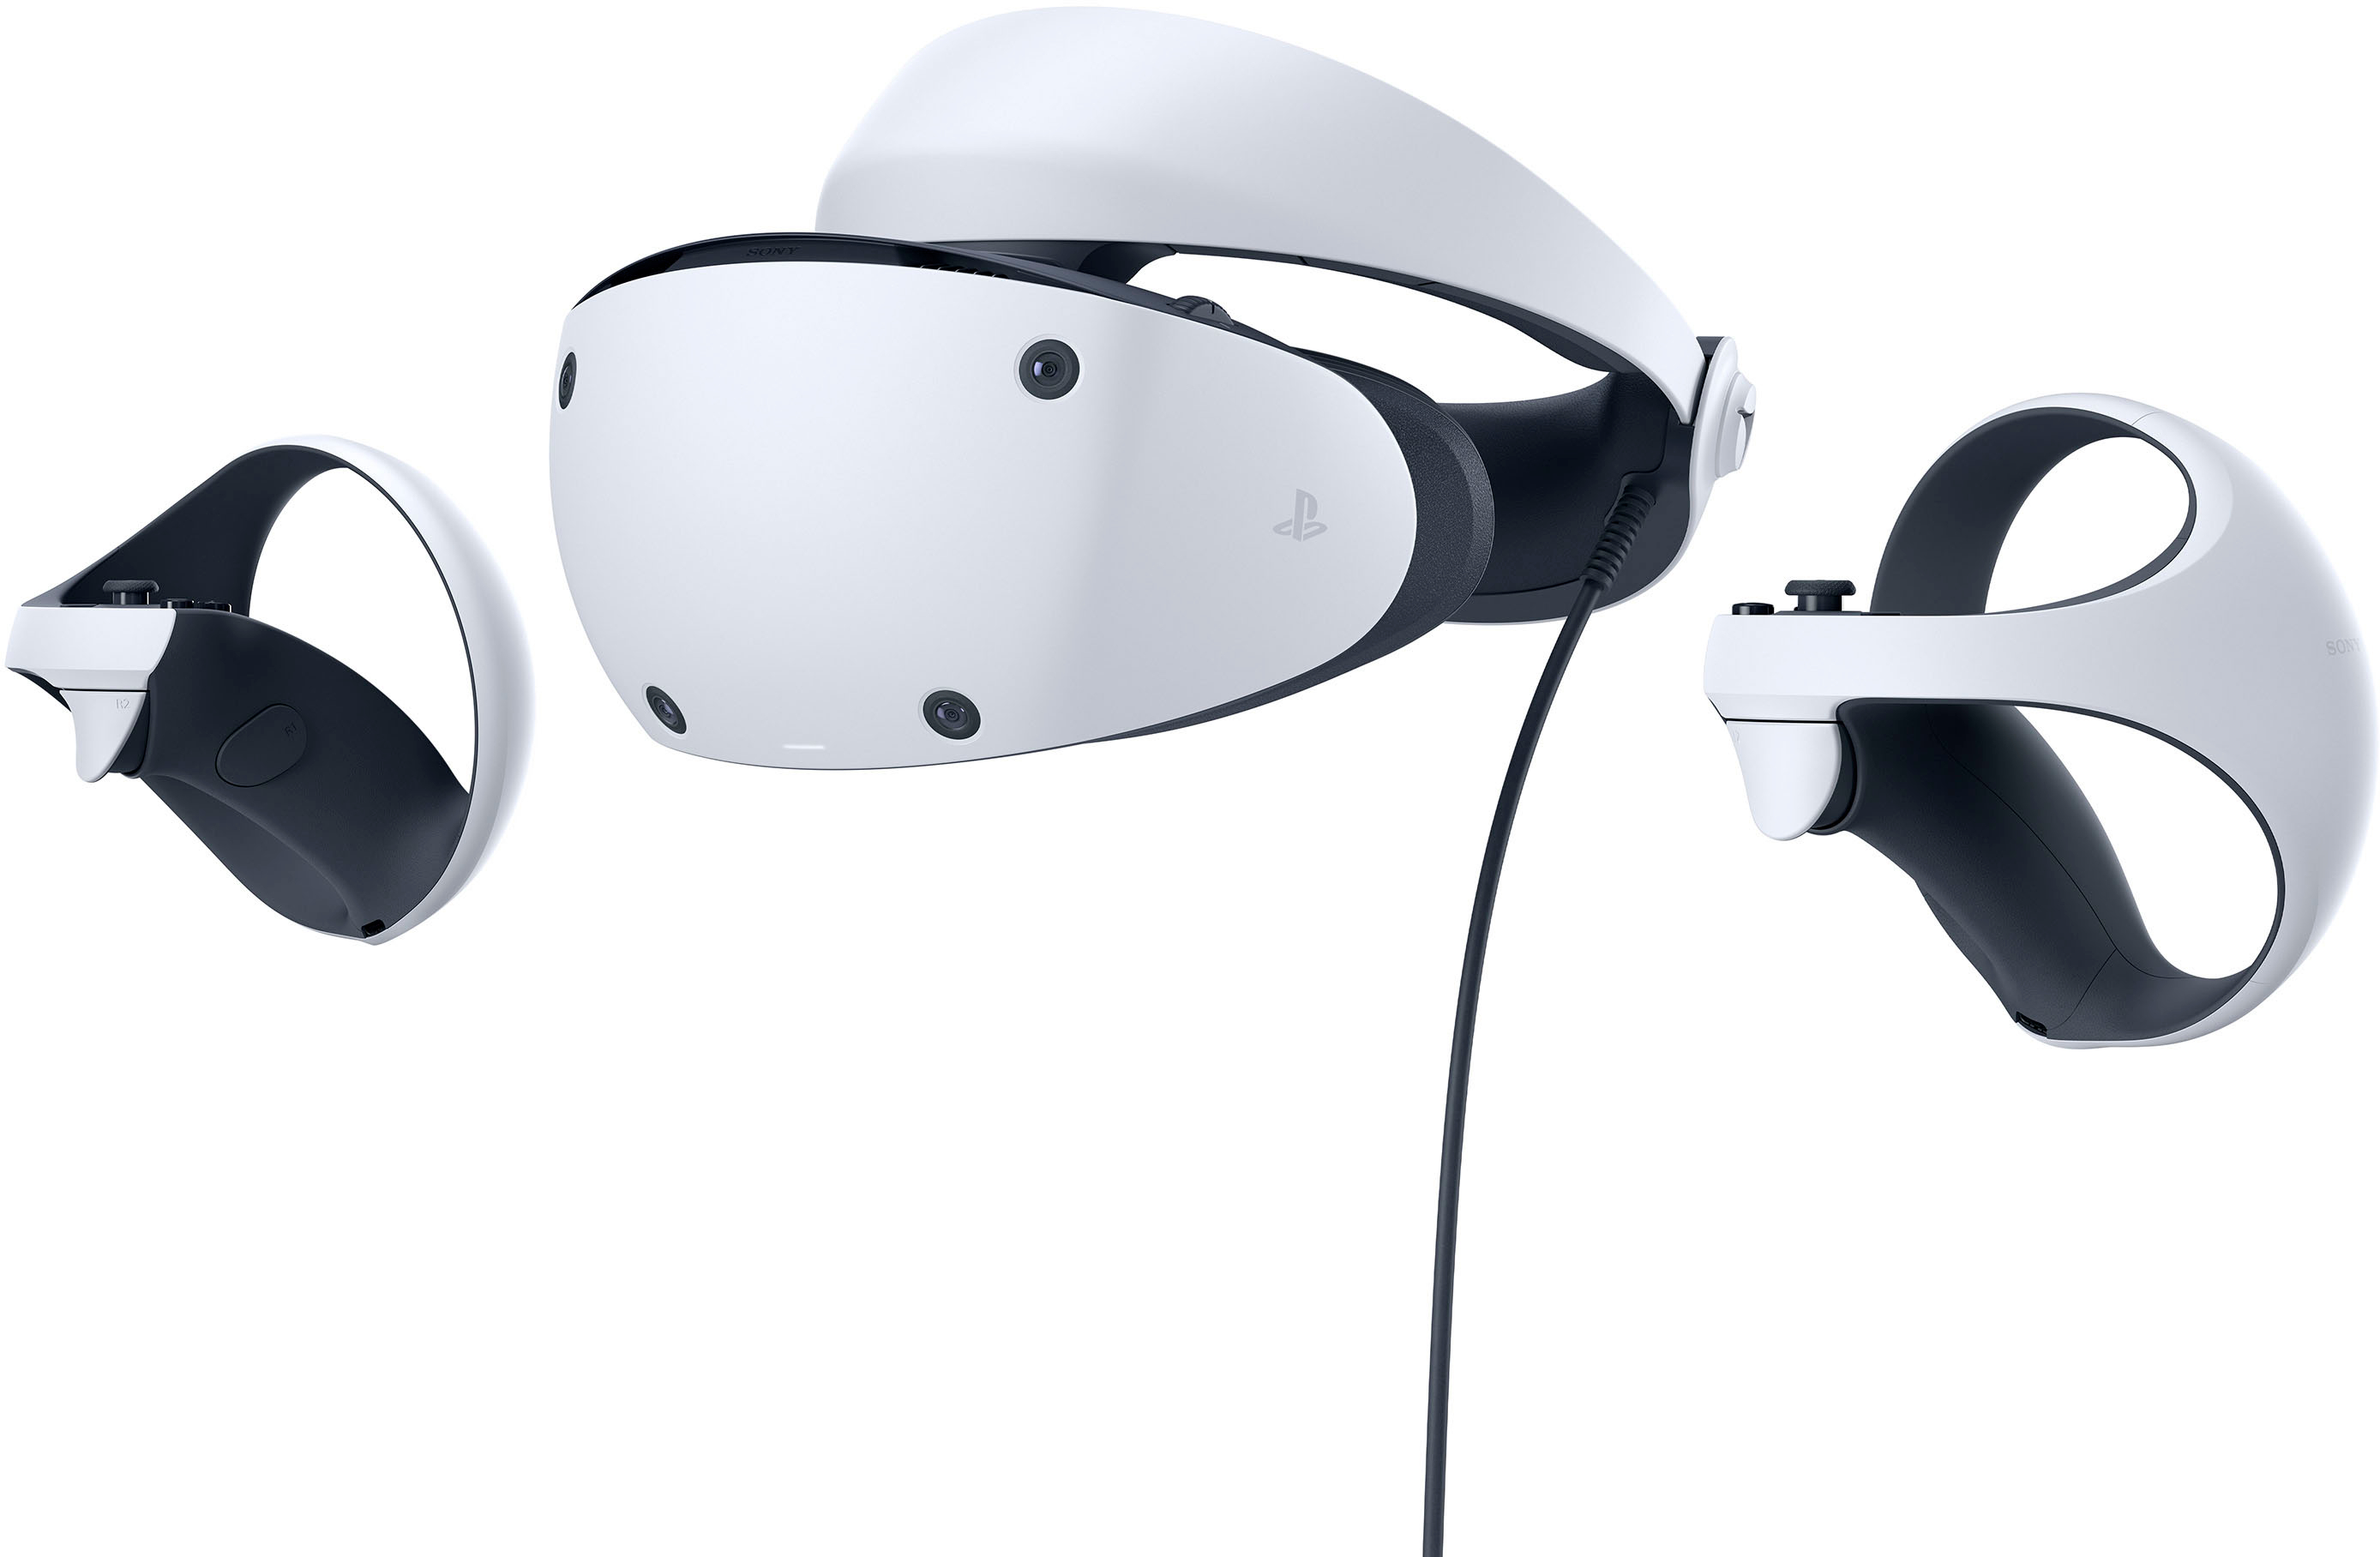 Sony PlayStation VR Review: Decent Console VR Elevated by Great Games